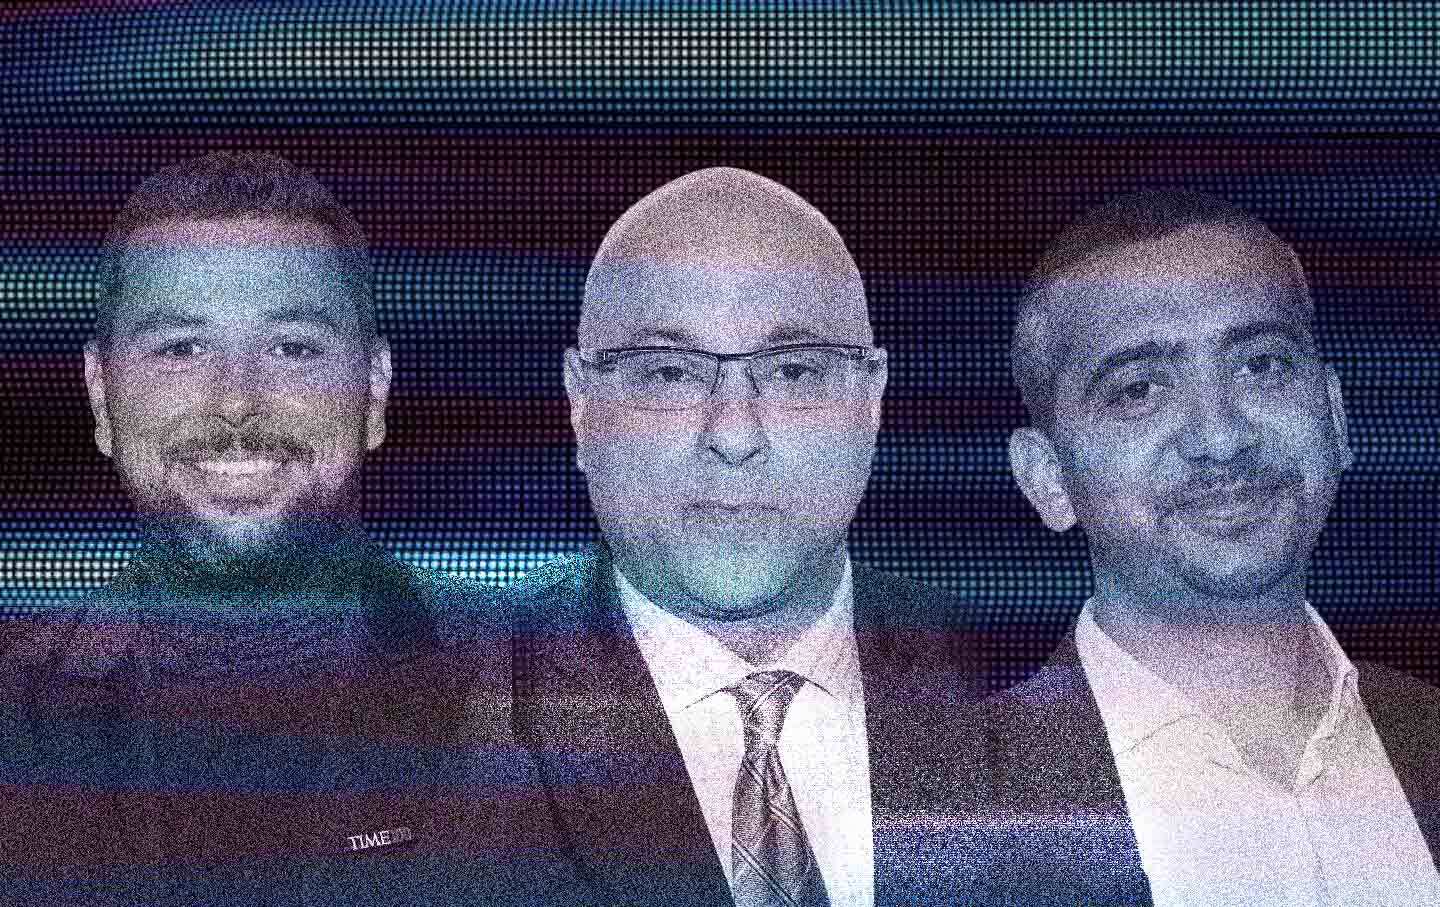 Left to right: Ayman Mohyeldin, Ali Melshi, and Mehdi Hasan.